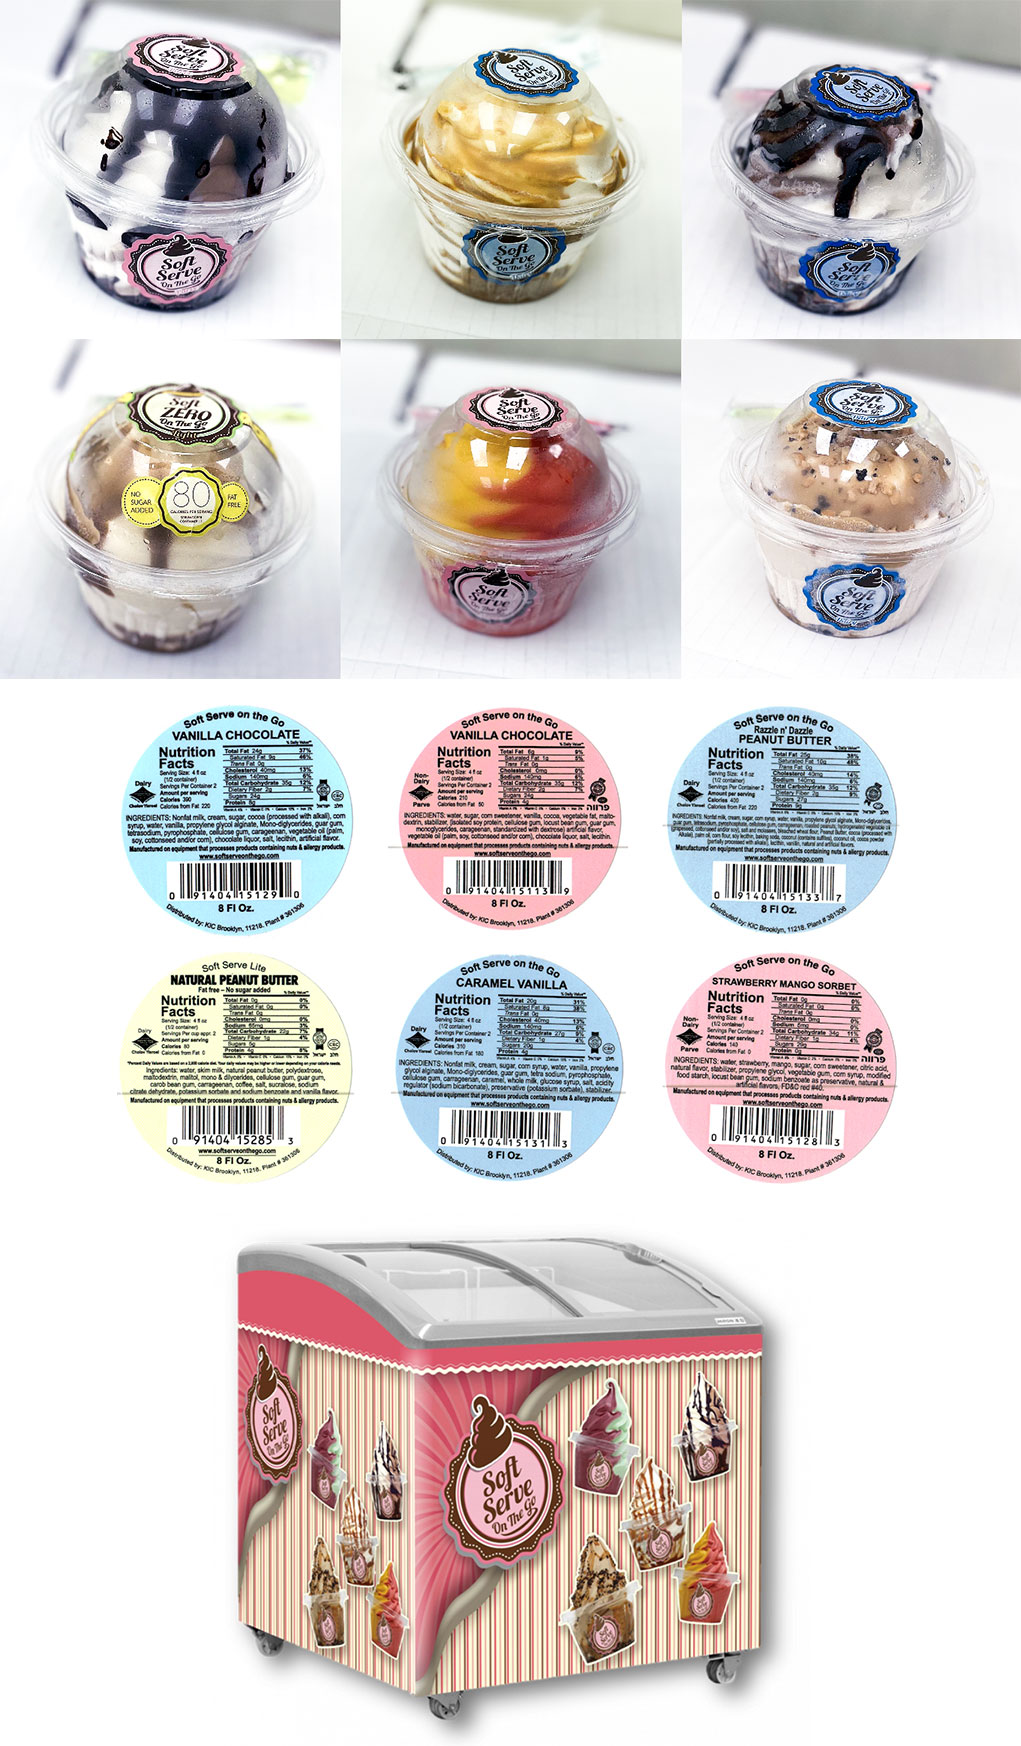 Outbreak Investigation of Listeria related to Ice Cream (August 2023) - Real Kosher Ice Cream Sample Product Images